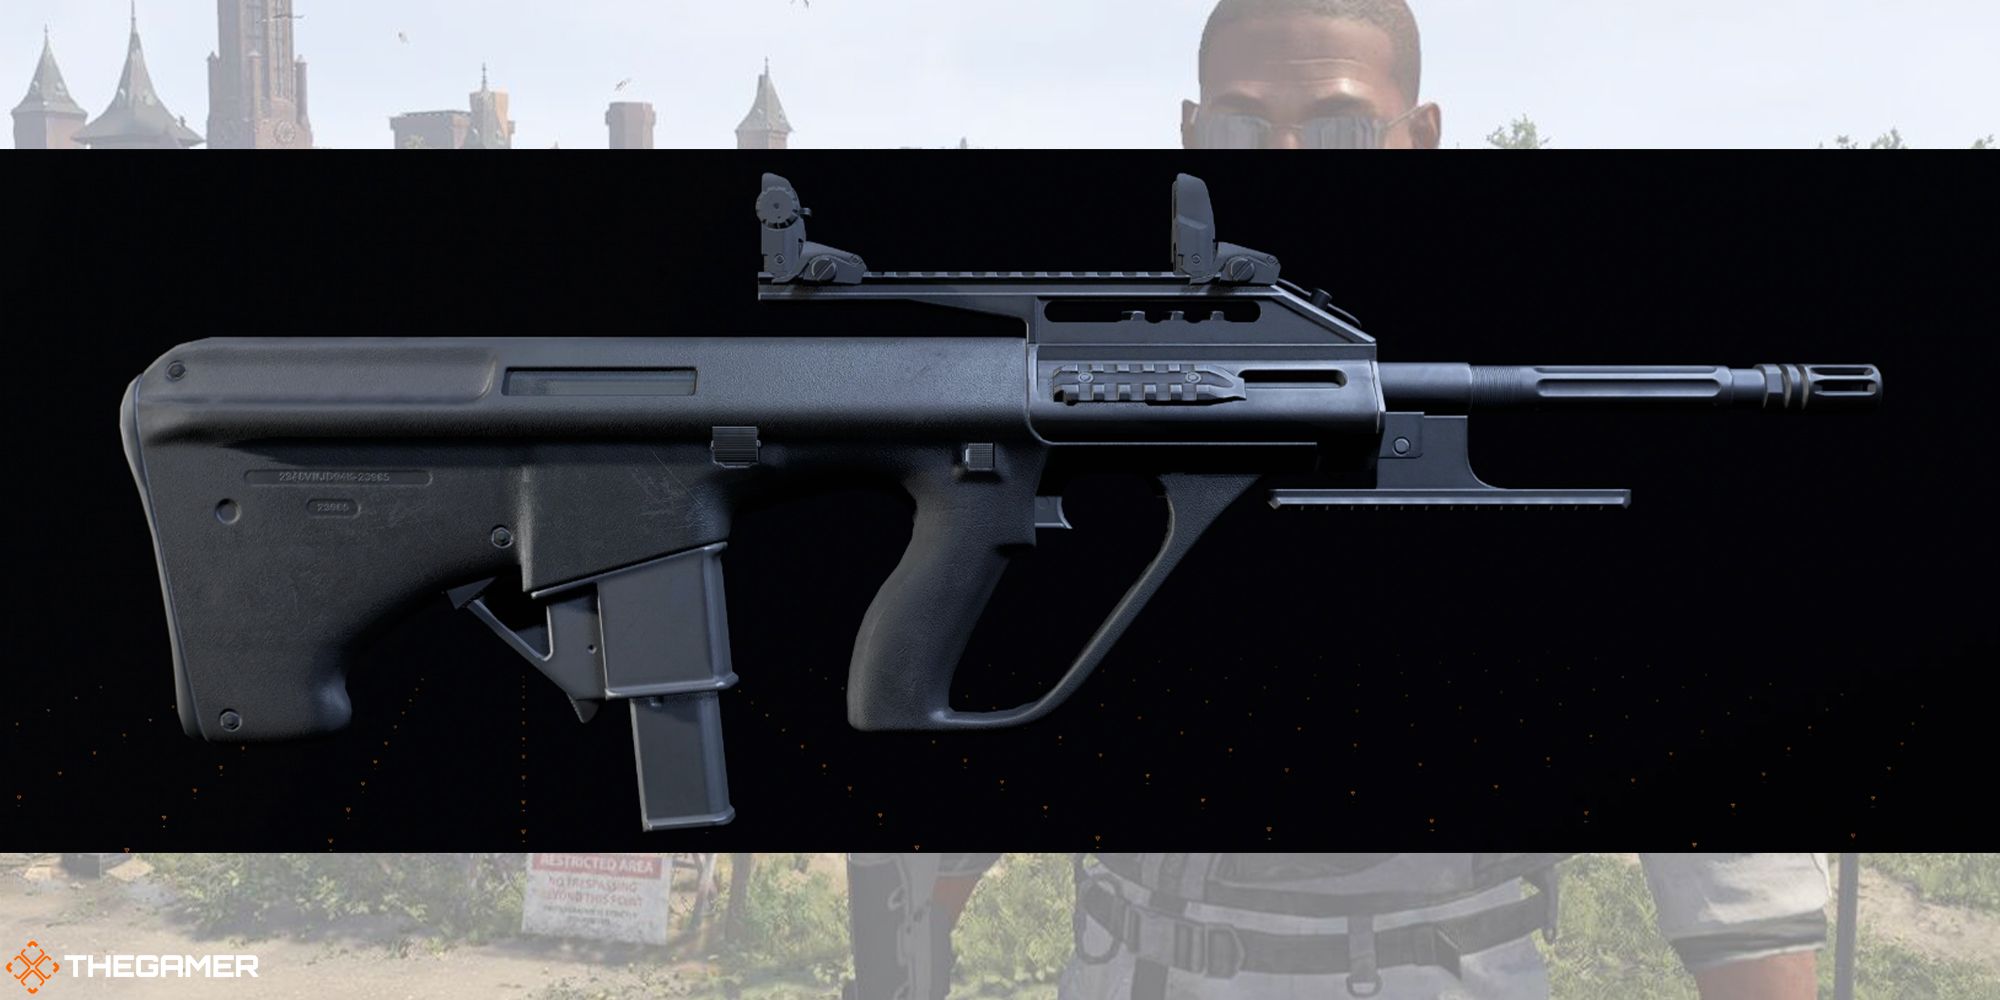 The Division 2 - AUG A3 SMG